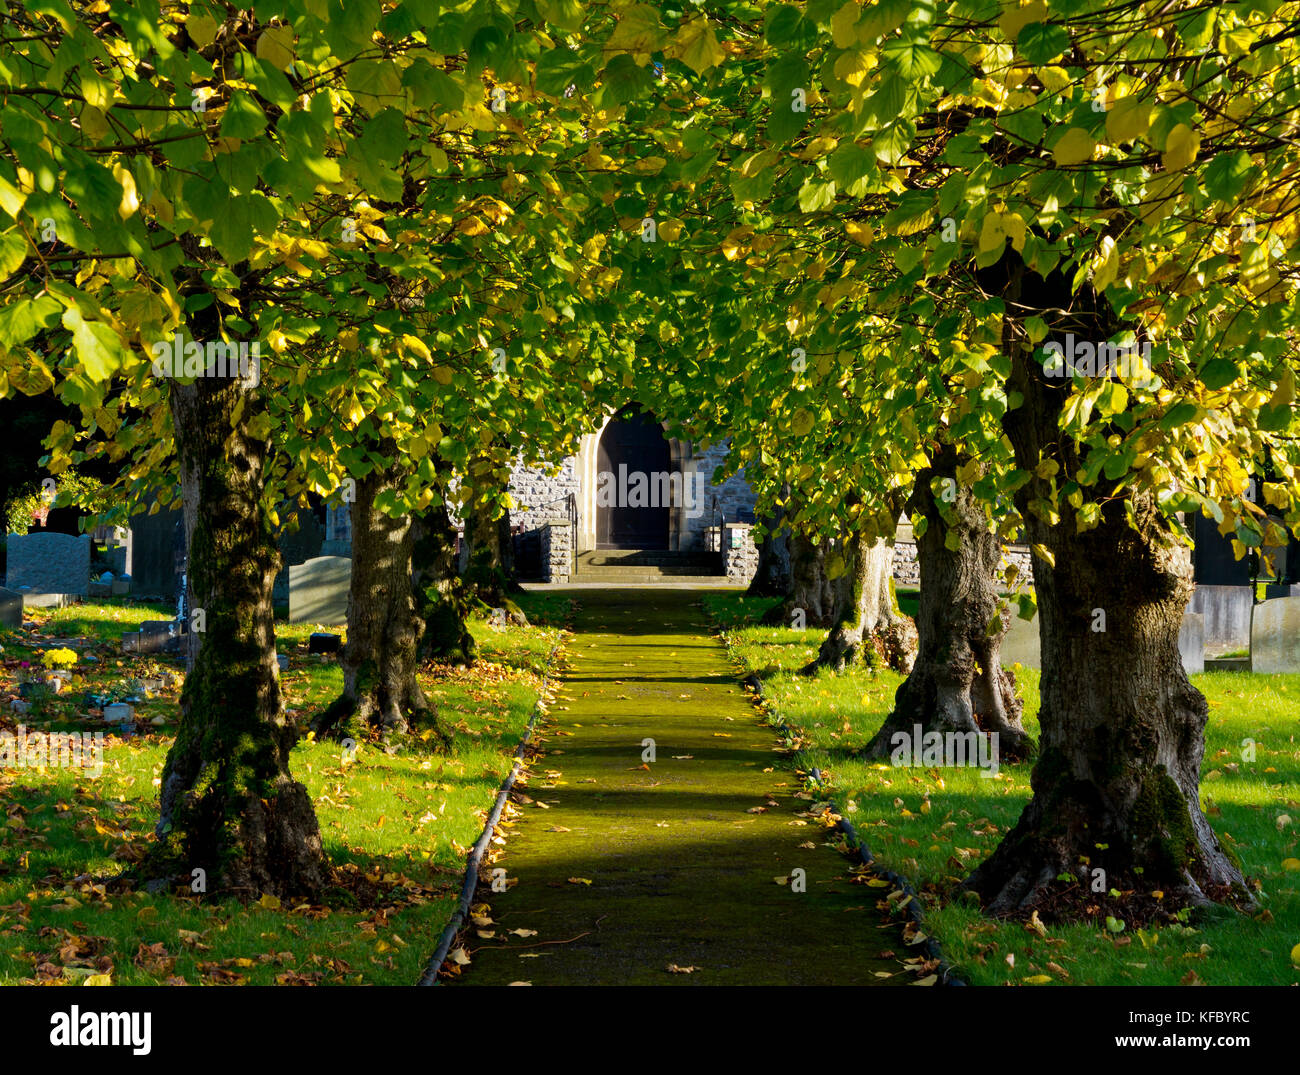 Avenue of brightly coloured trees in front of St Barnabas Church in Bradwell village Derbyshire Peak District England UK Stock Photo